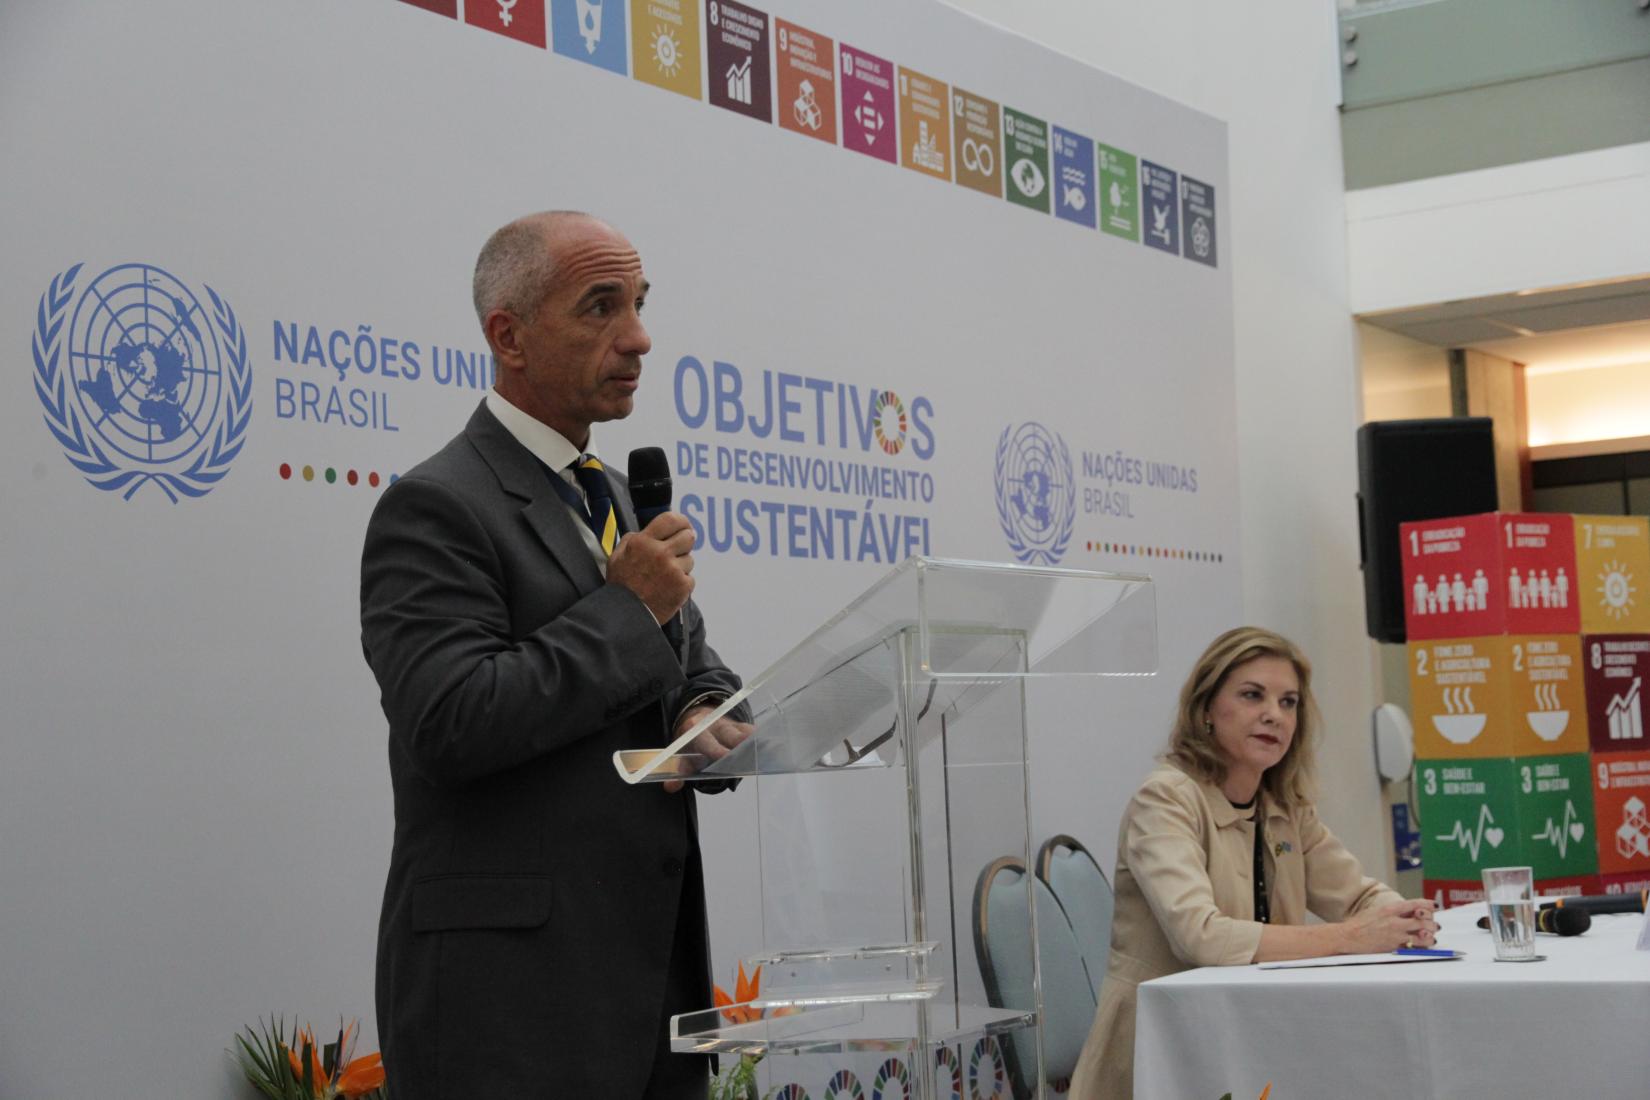 Resident Representative of the United Nations Development Program (UNDP), Claudio Providas. The new UN shared services center in Brazil will be led by the UNDP, which has been chosen to be the service provider in the country.